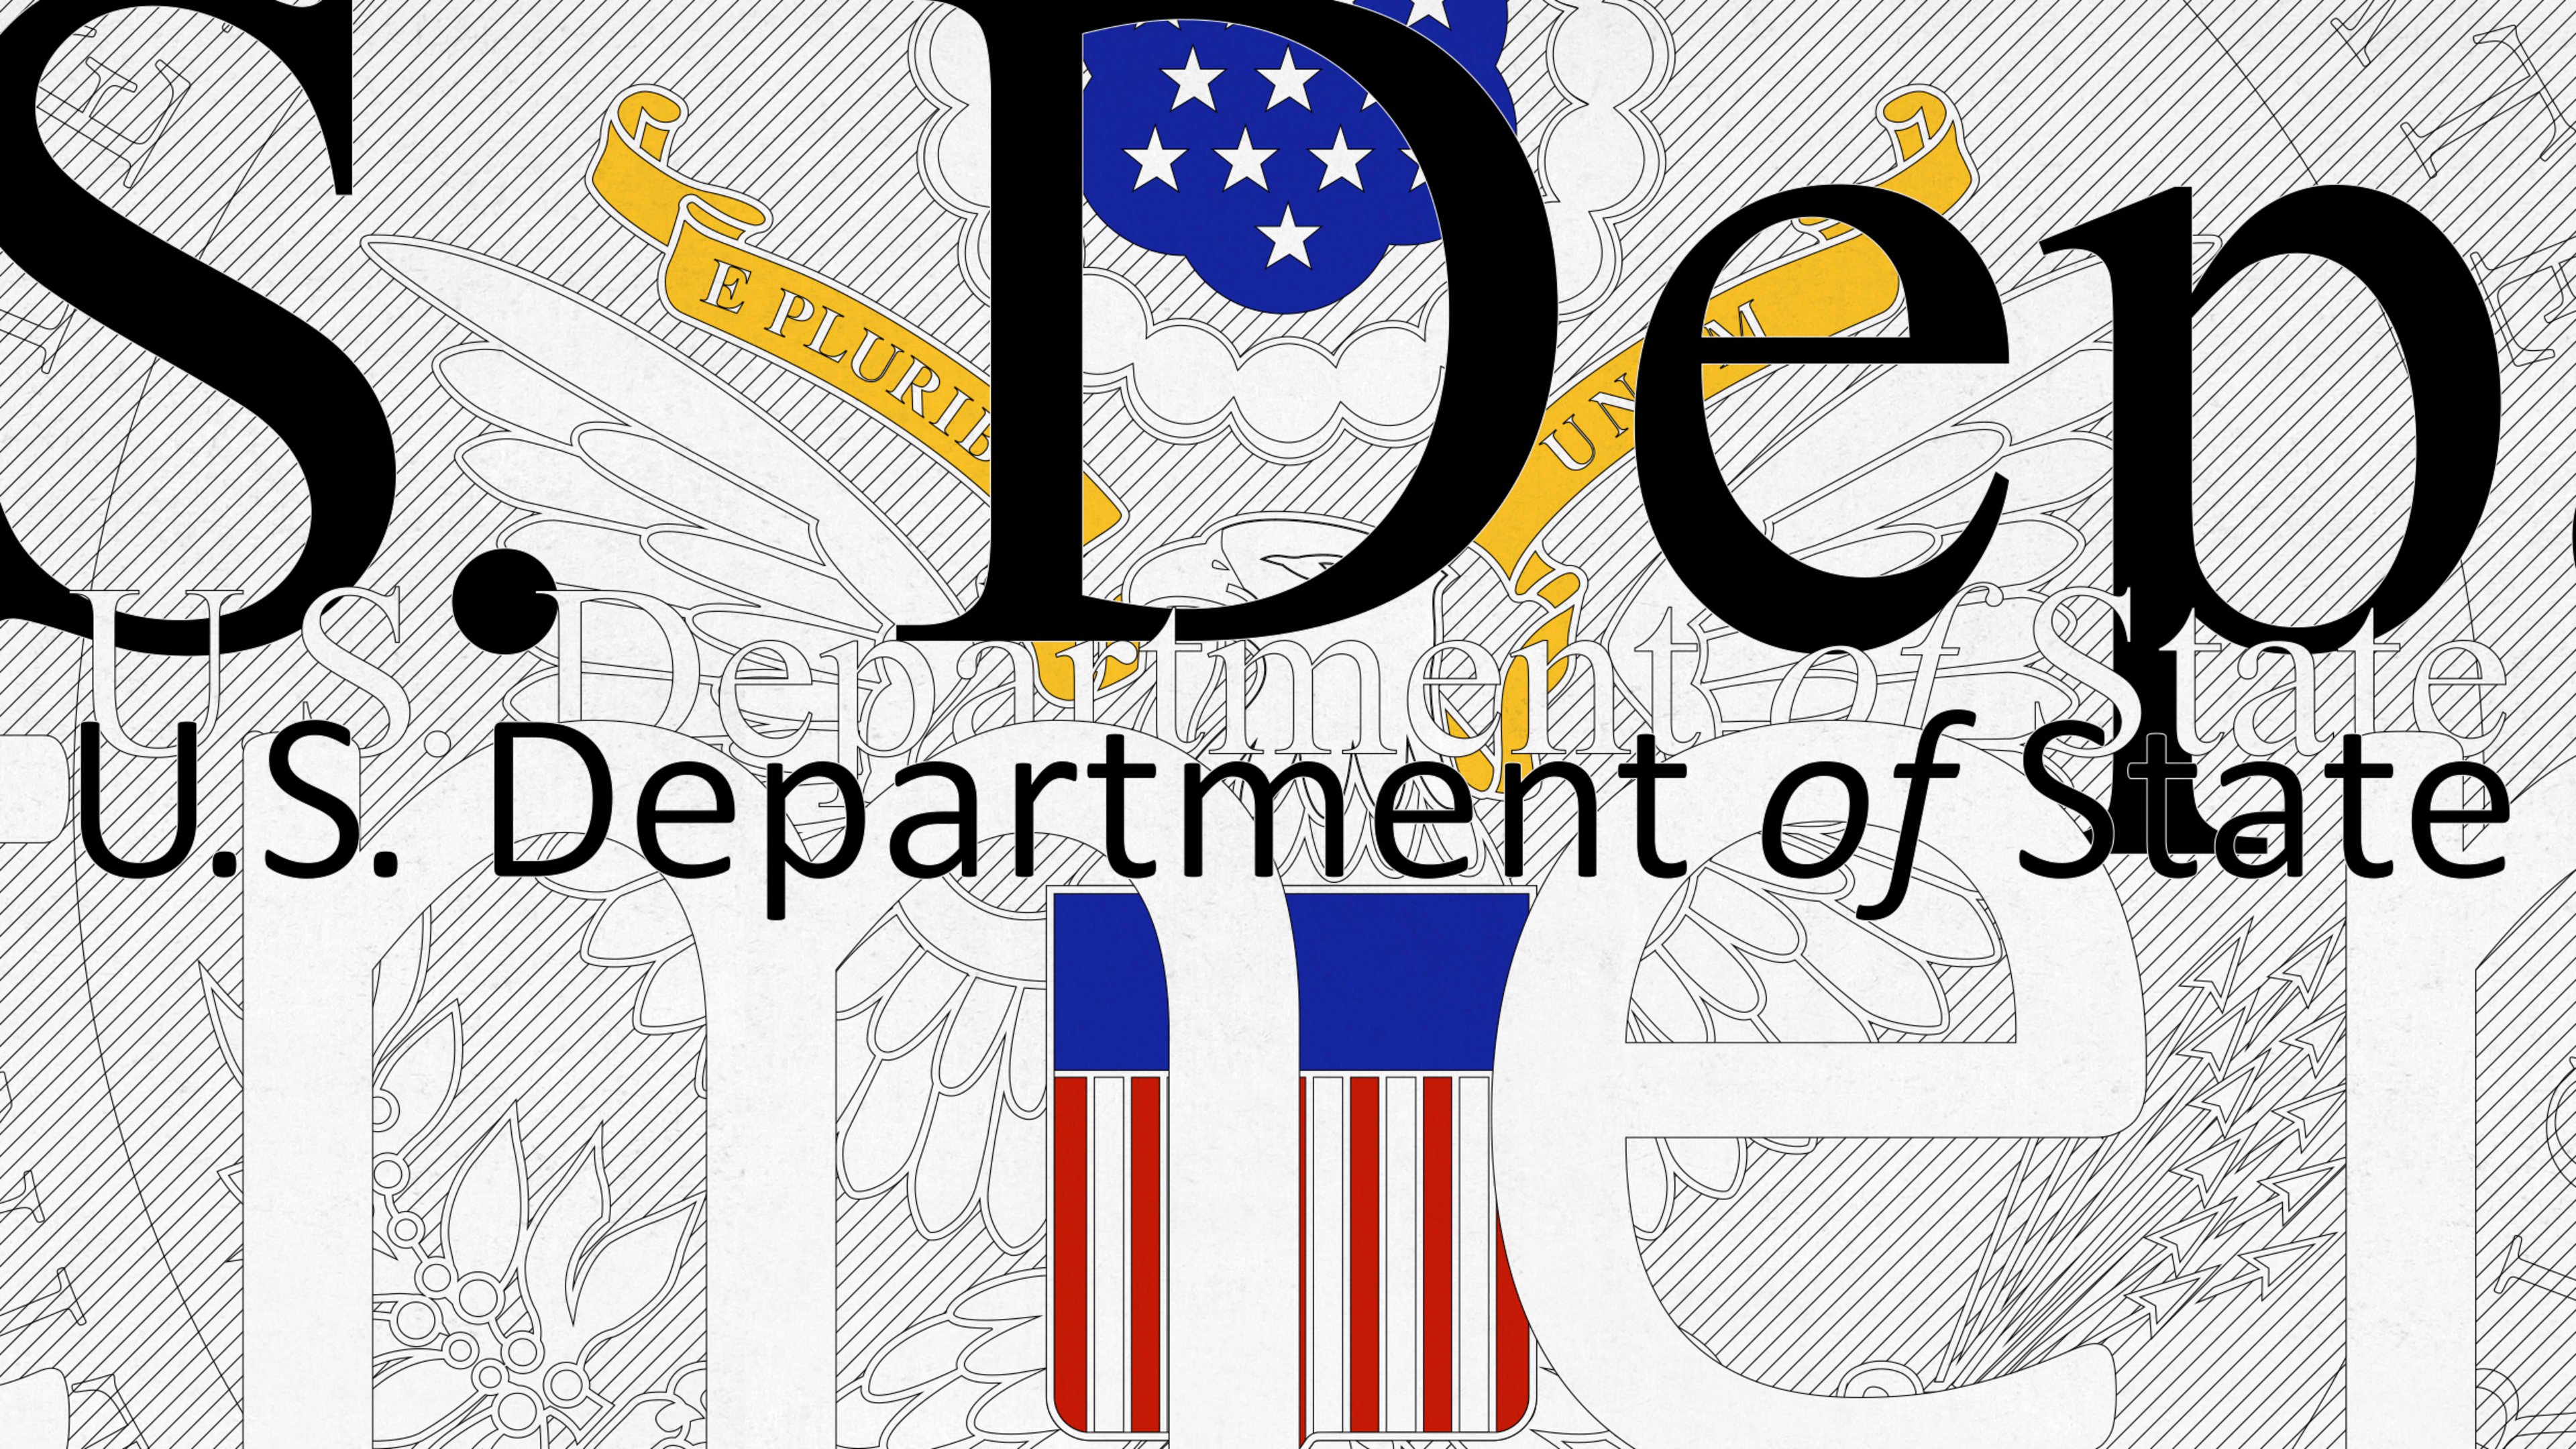 The State Department is ditching Times New Roman for Calibri